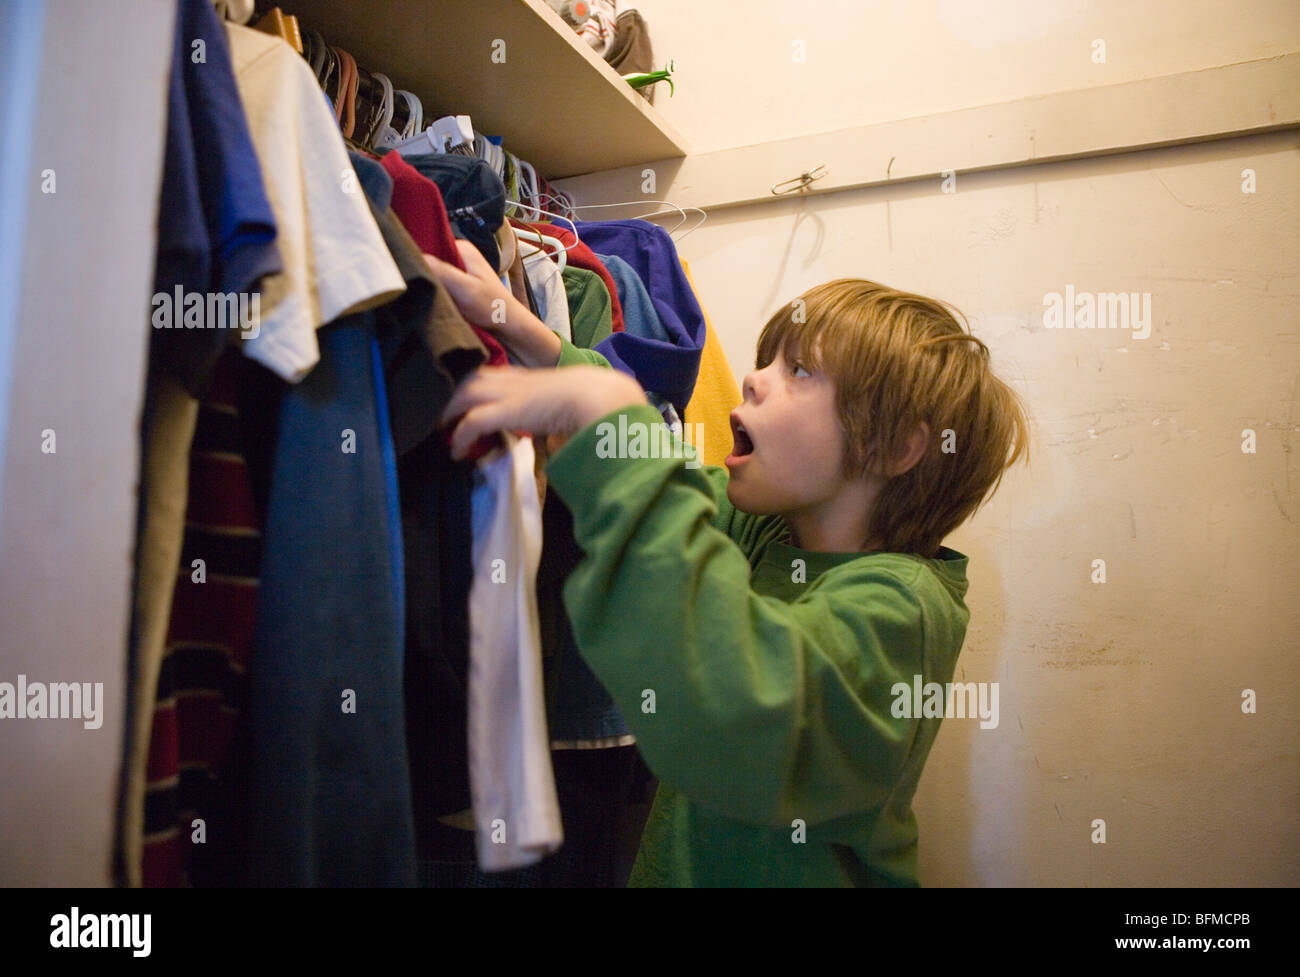 Seven year old selecting clothes to wear inside his closet in the morning Stock Photo